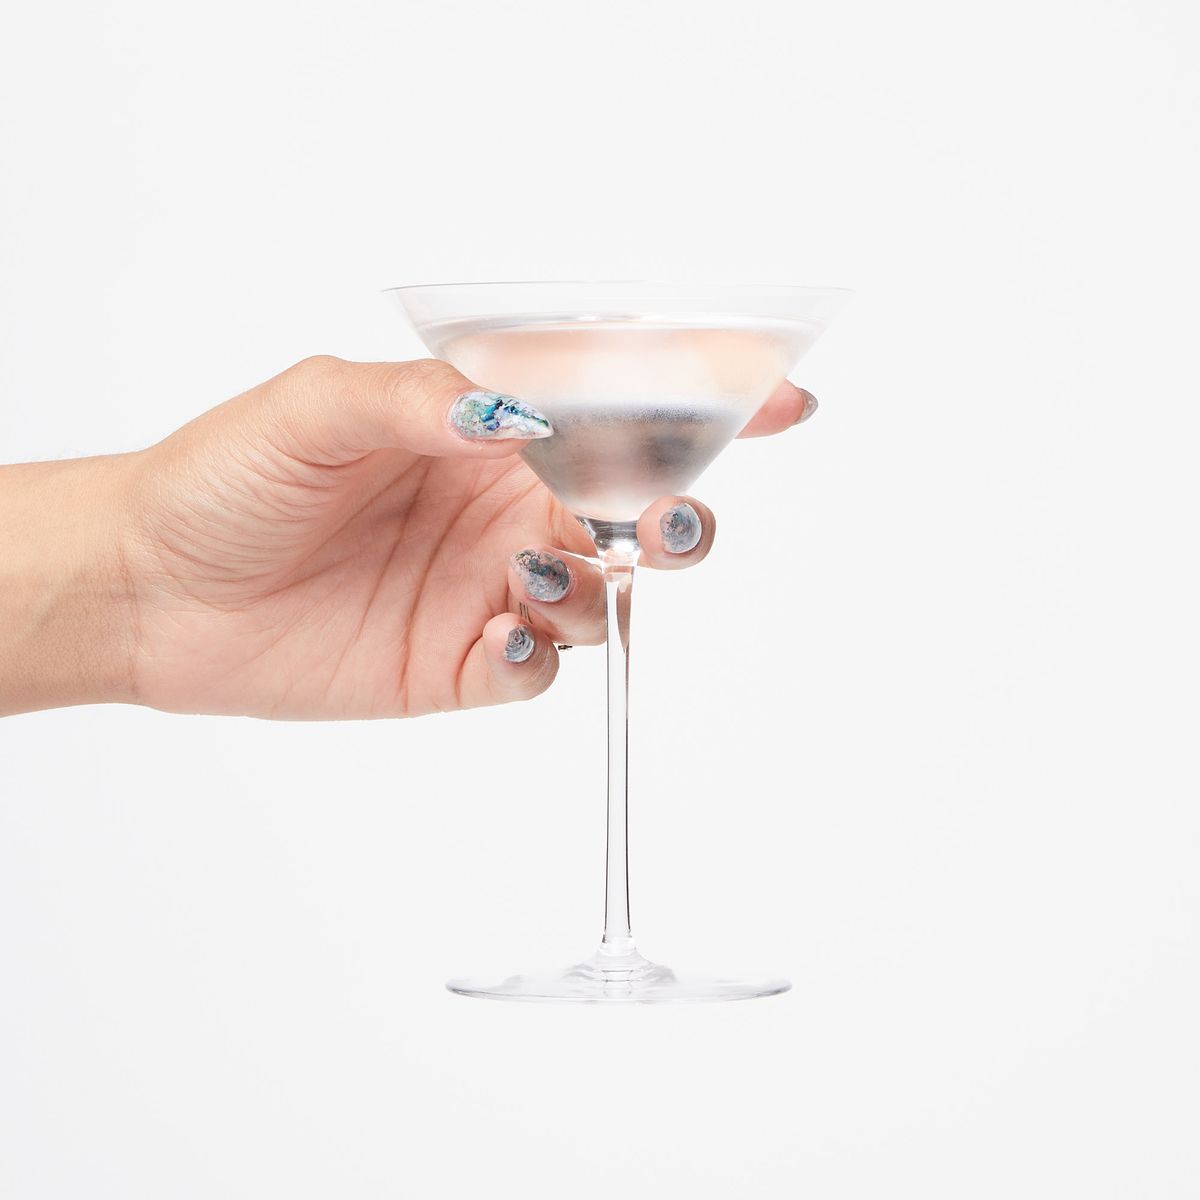 Hand holding a martini glass full of a clear liquid with condensation on the outside